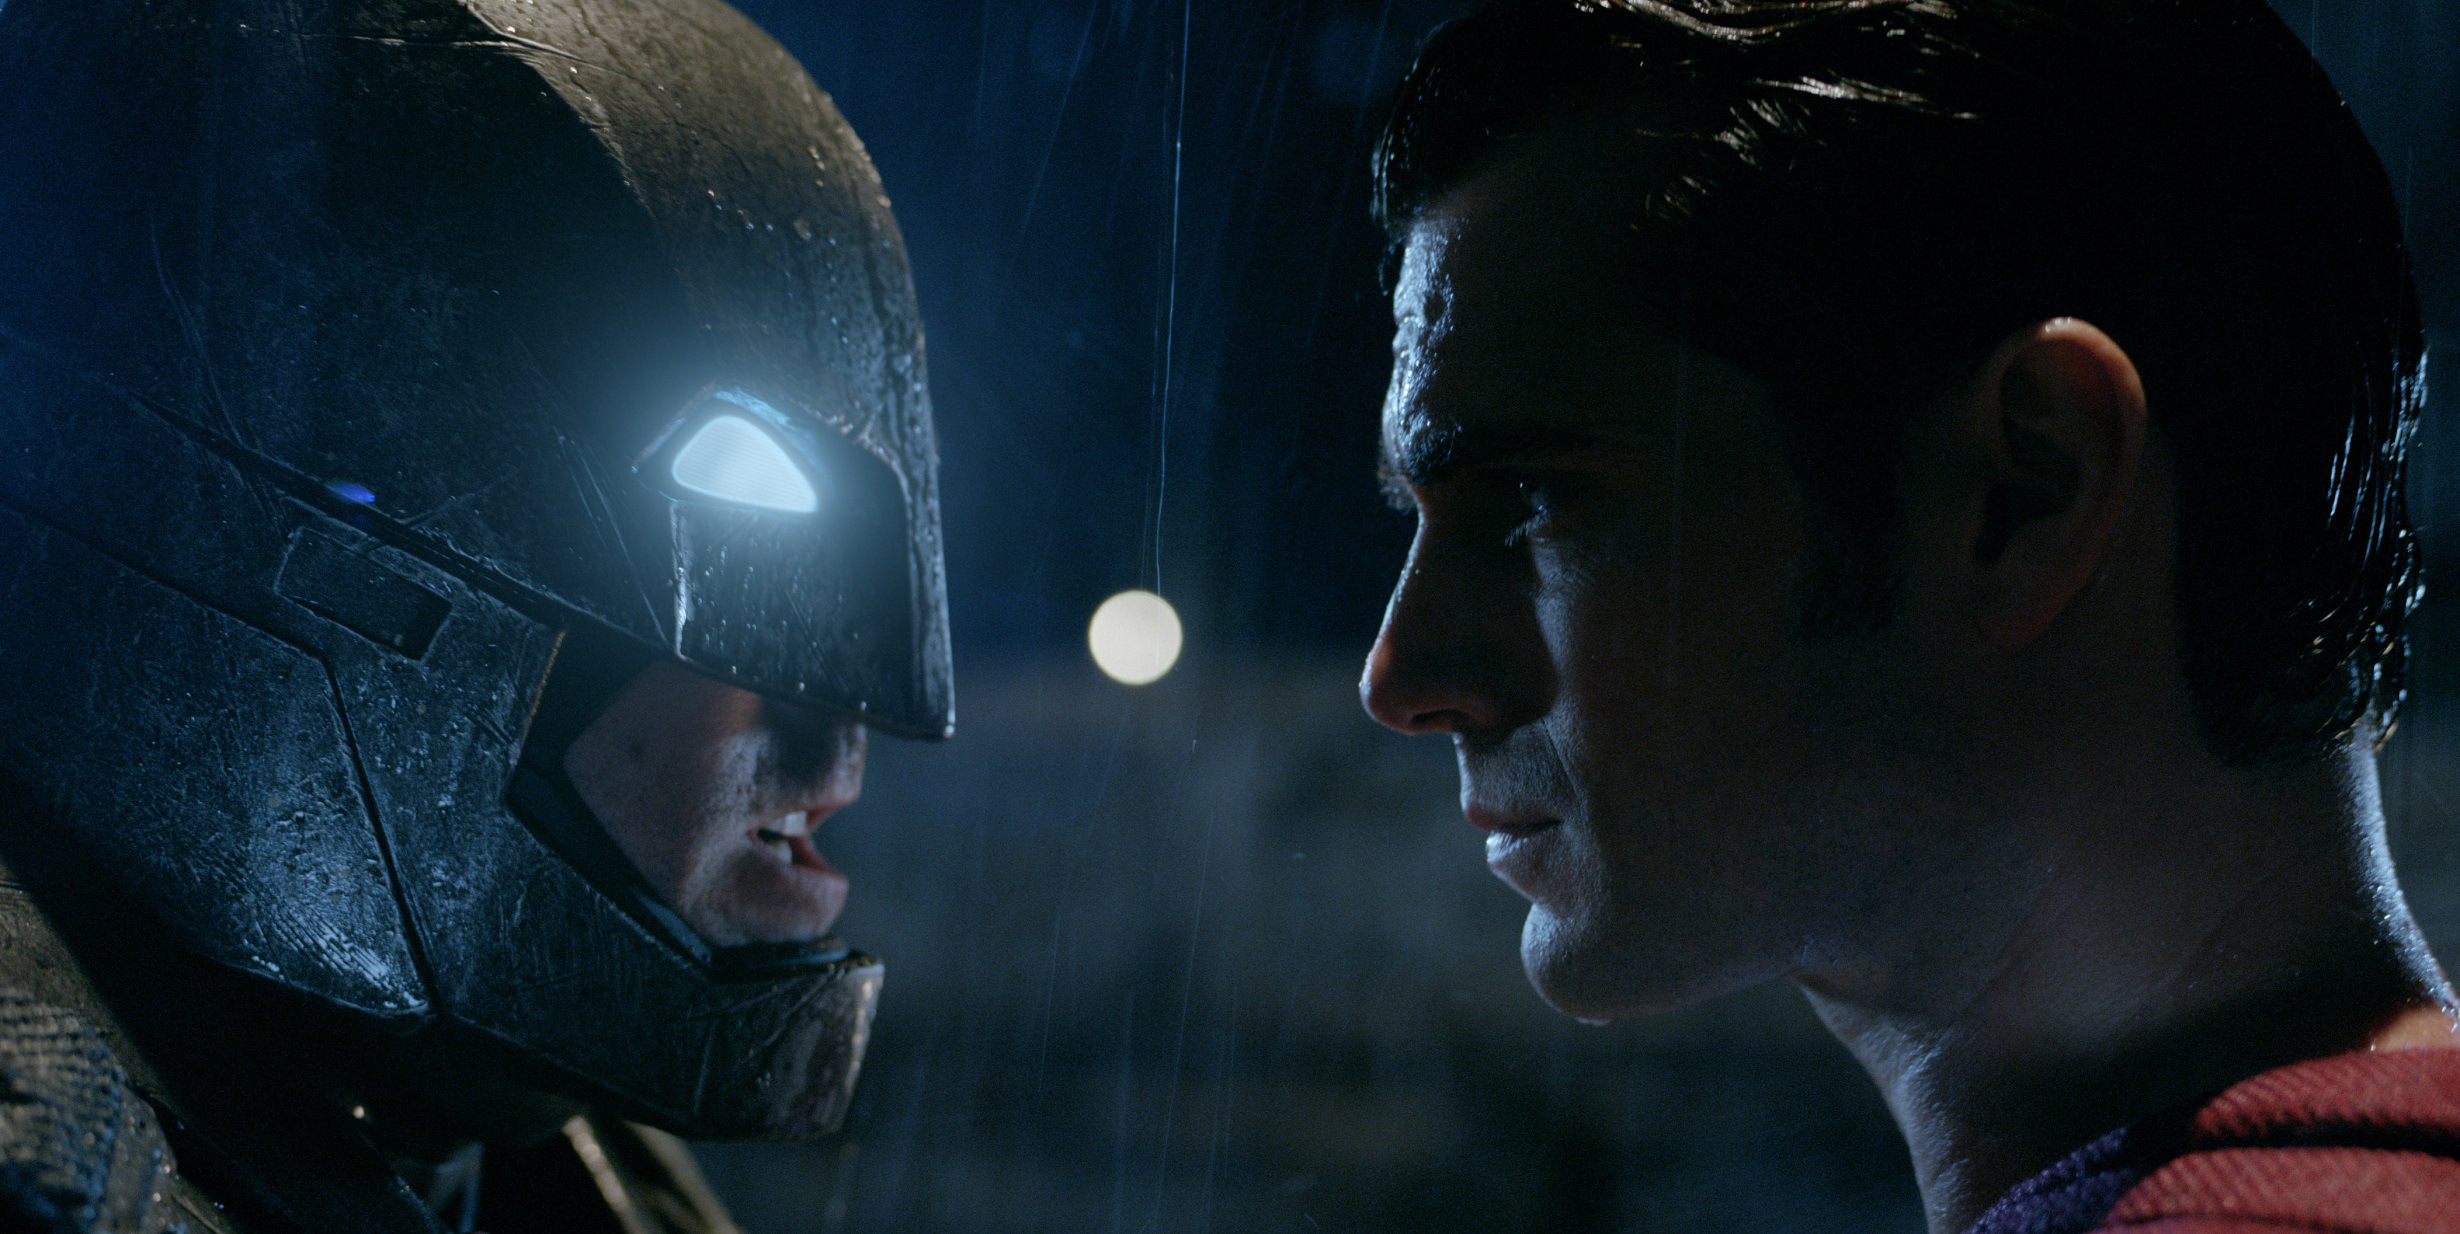 We've Got Some New Batman V. Superman Photos to Peruse for Clues